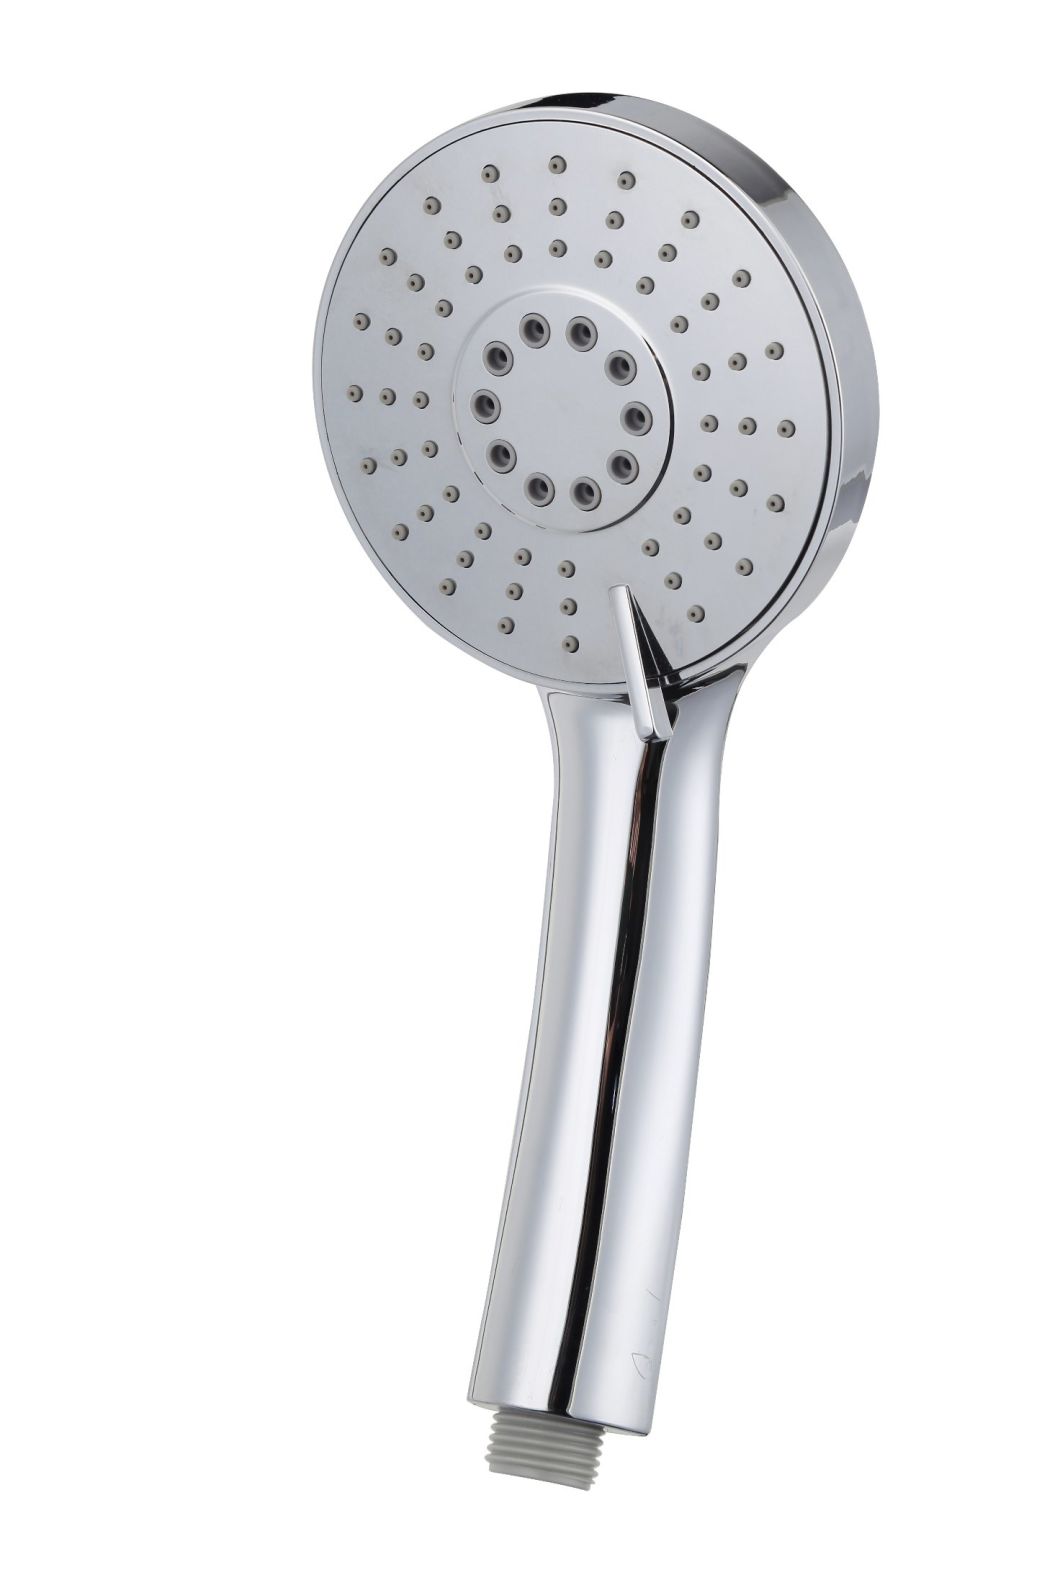 Hot Sell Hand Held Shower Head Made in China Lm-3007gh